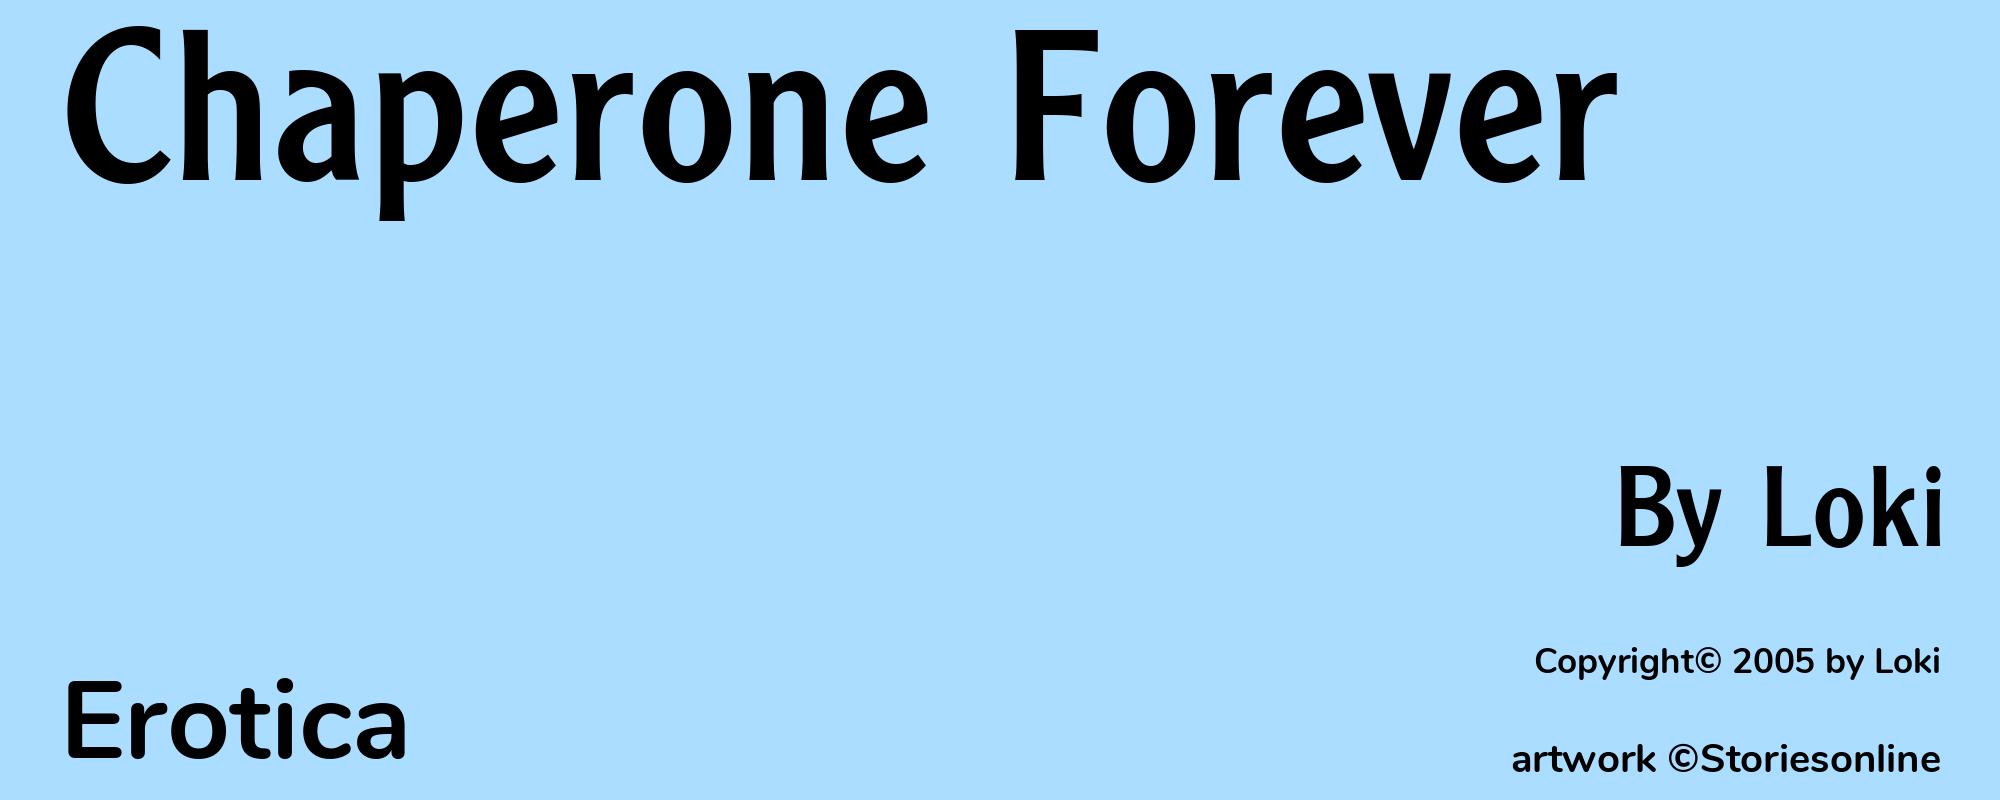 Chaperone Forever - Cover